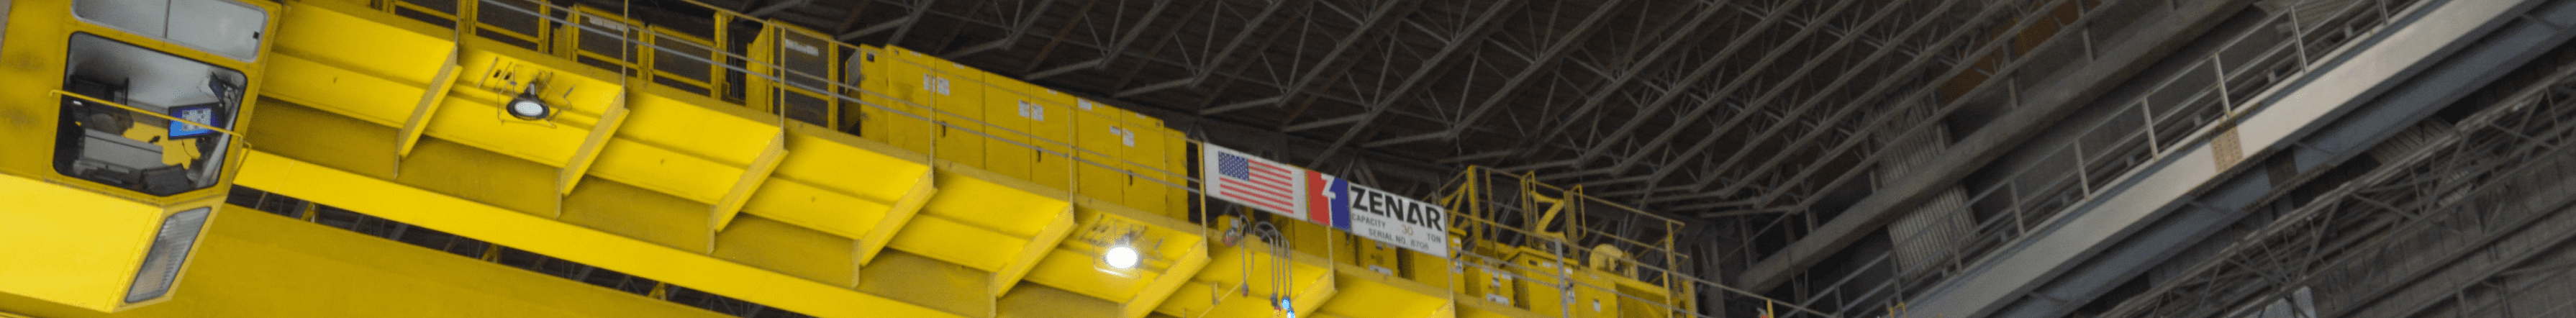 Banner with American flag and Zenar logo on crane